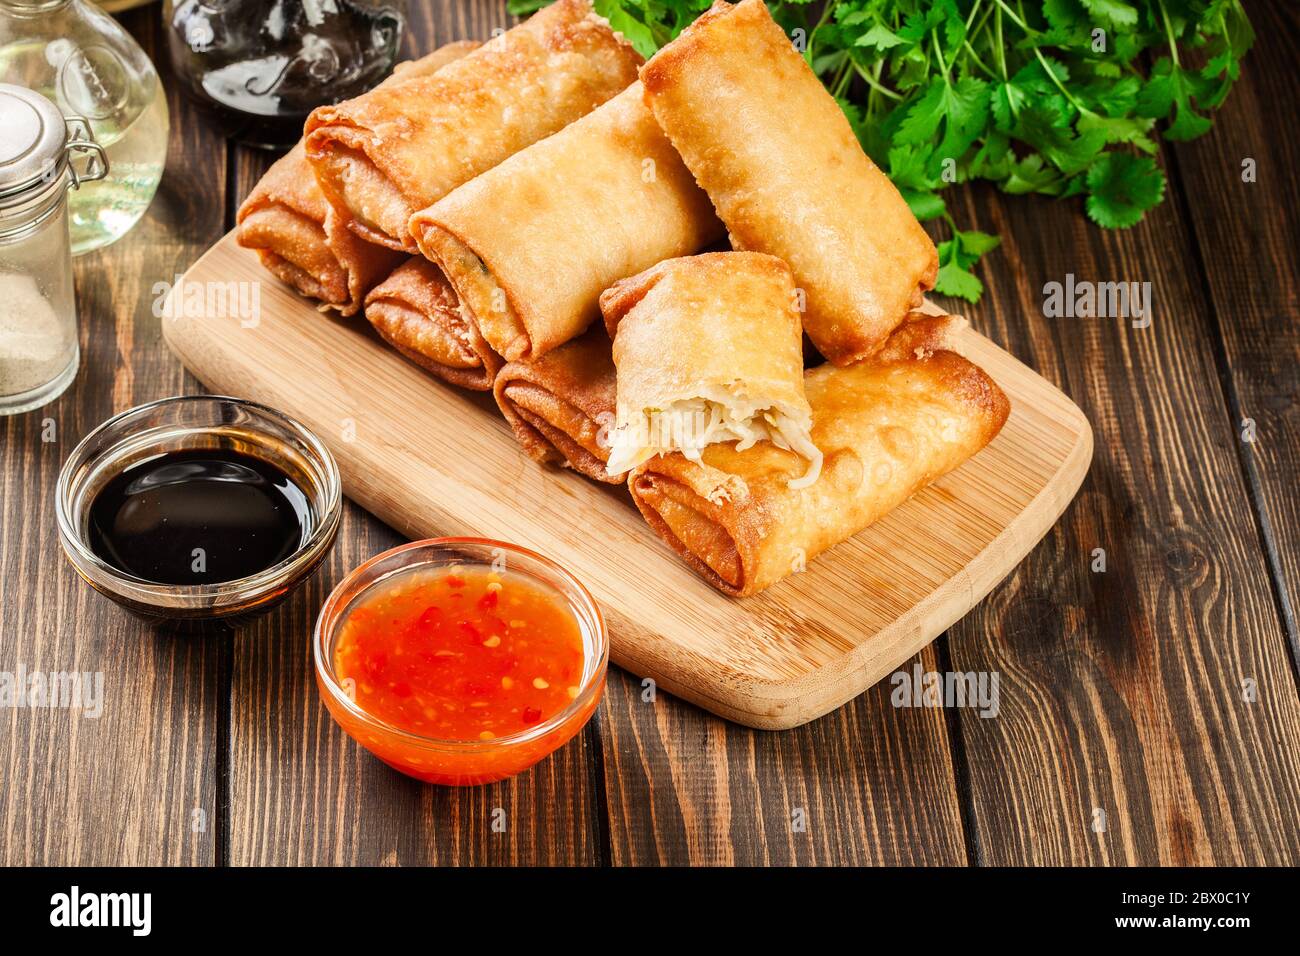 Spring rolls with chicken and vegetables on chopping board. Asian cuisine. Stock Photo